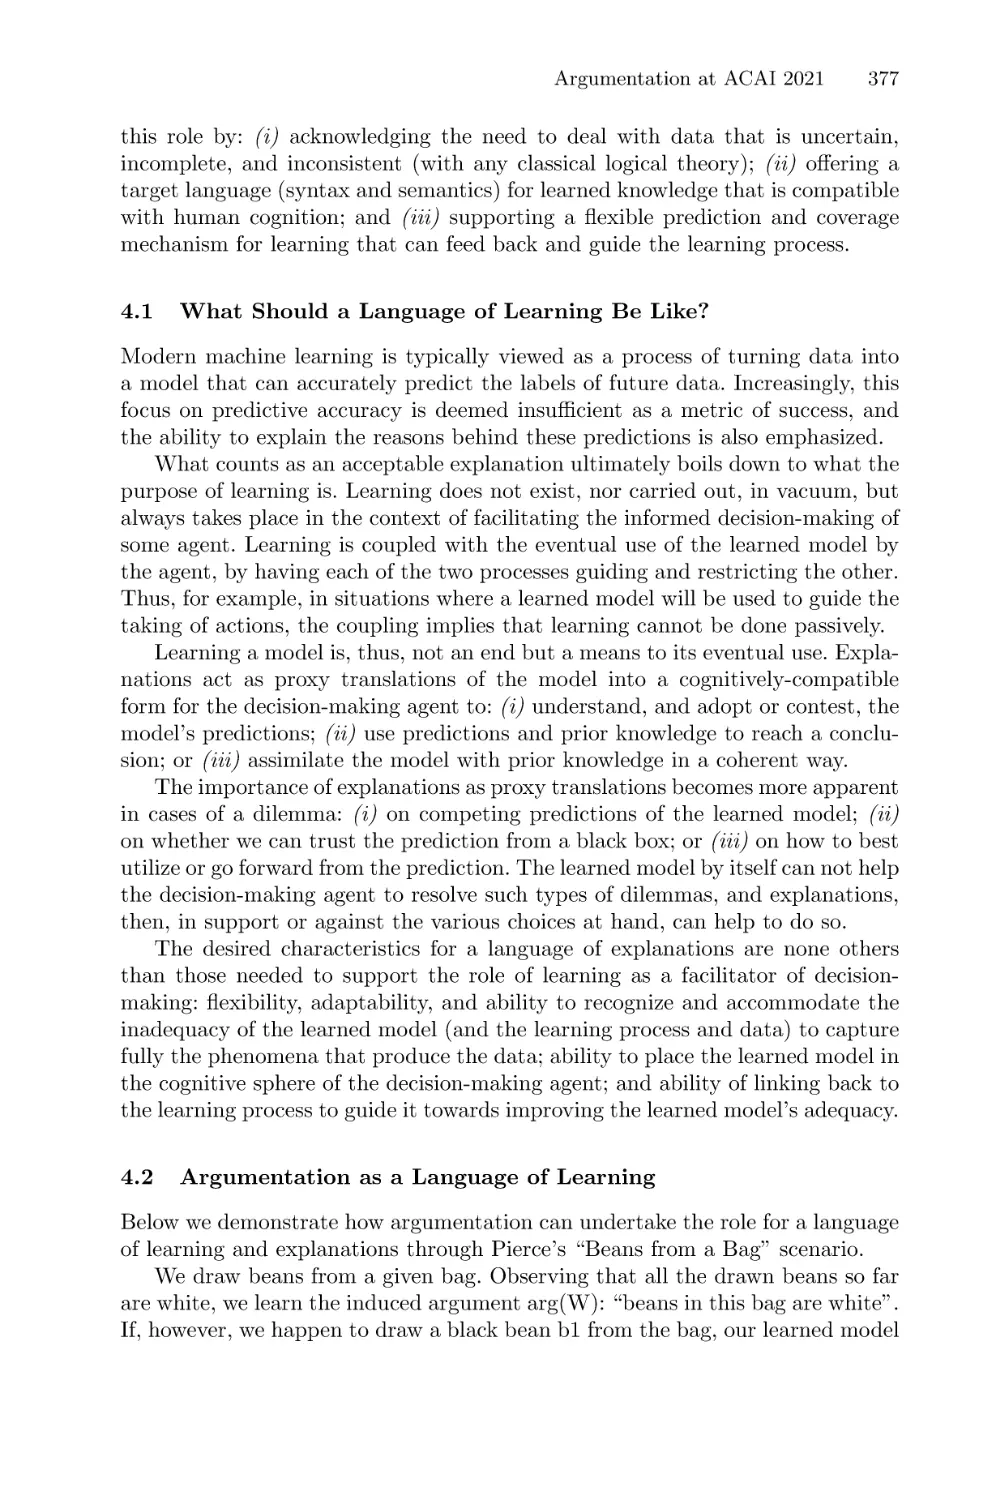 4.1 What Should a Language of Learning Be Like?
4.2 Argumentation as a Language of Learning